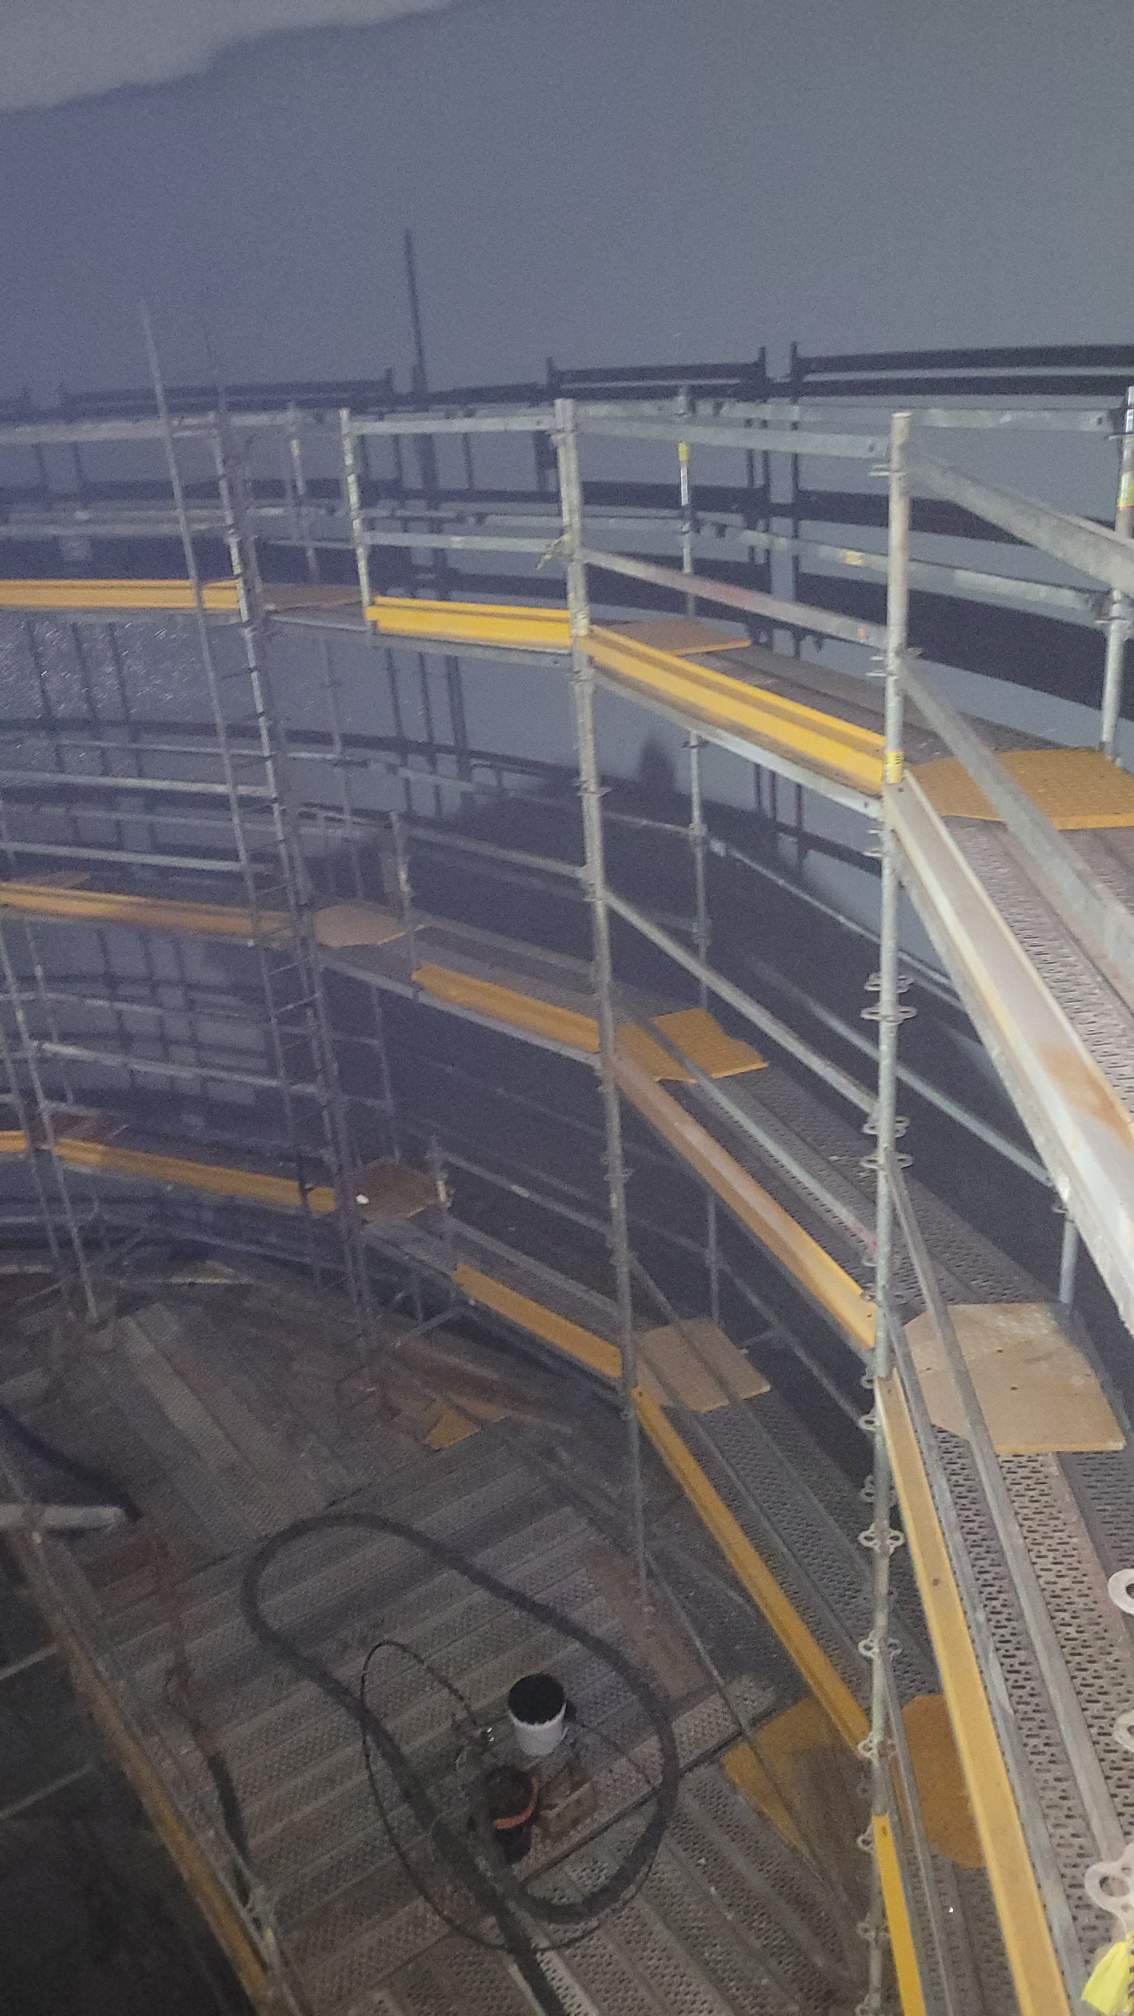 Scaffolding against the wall inside a spray dry absorber to paint industrial coating.